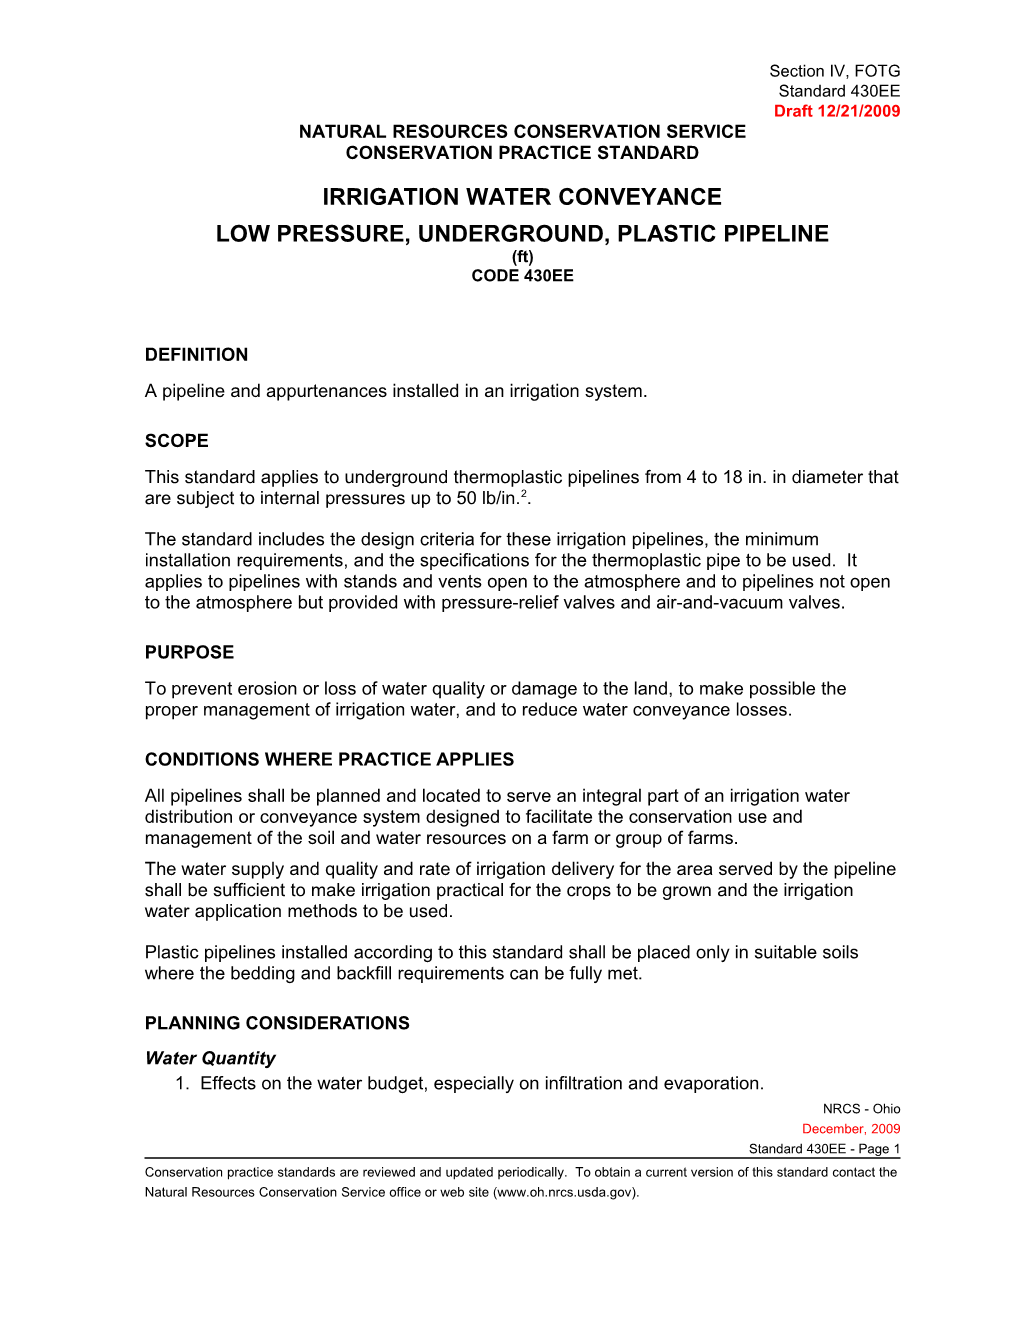 Irrigation Water Conveyance (Ft)